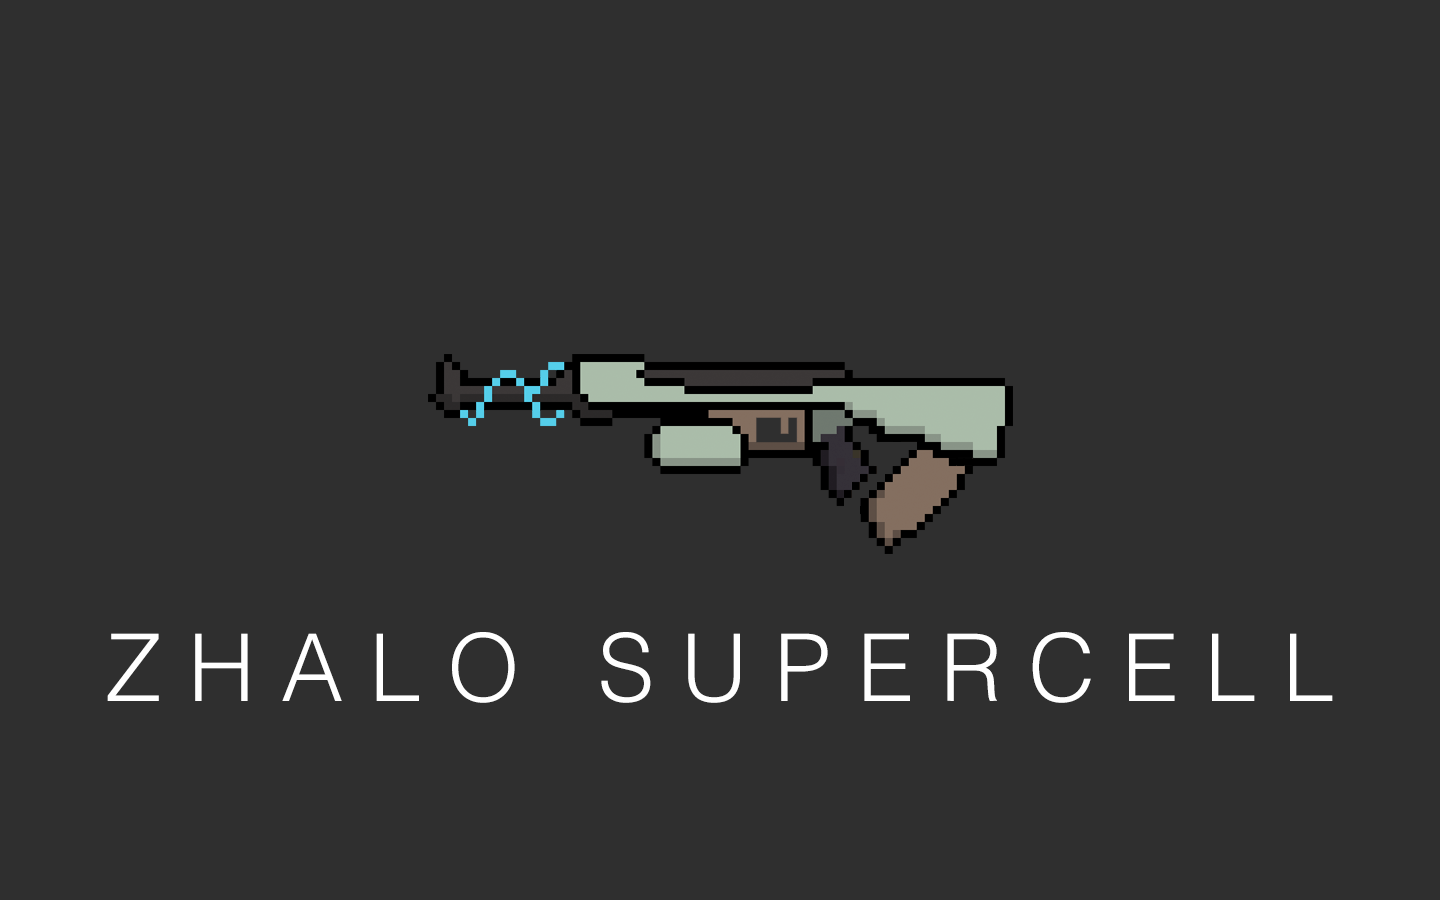 Hey guys, I made a Zhalo Supercell Pixel Art wallpaper